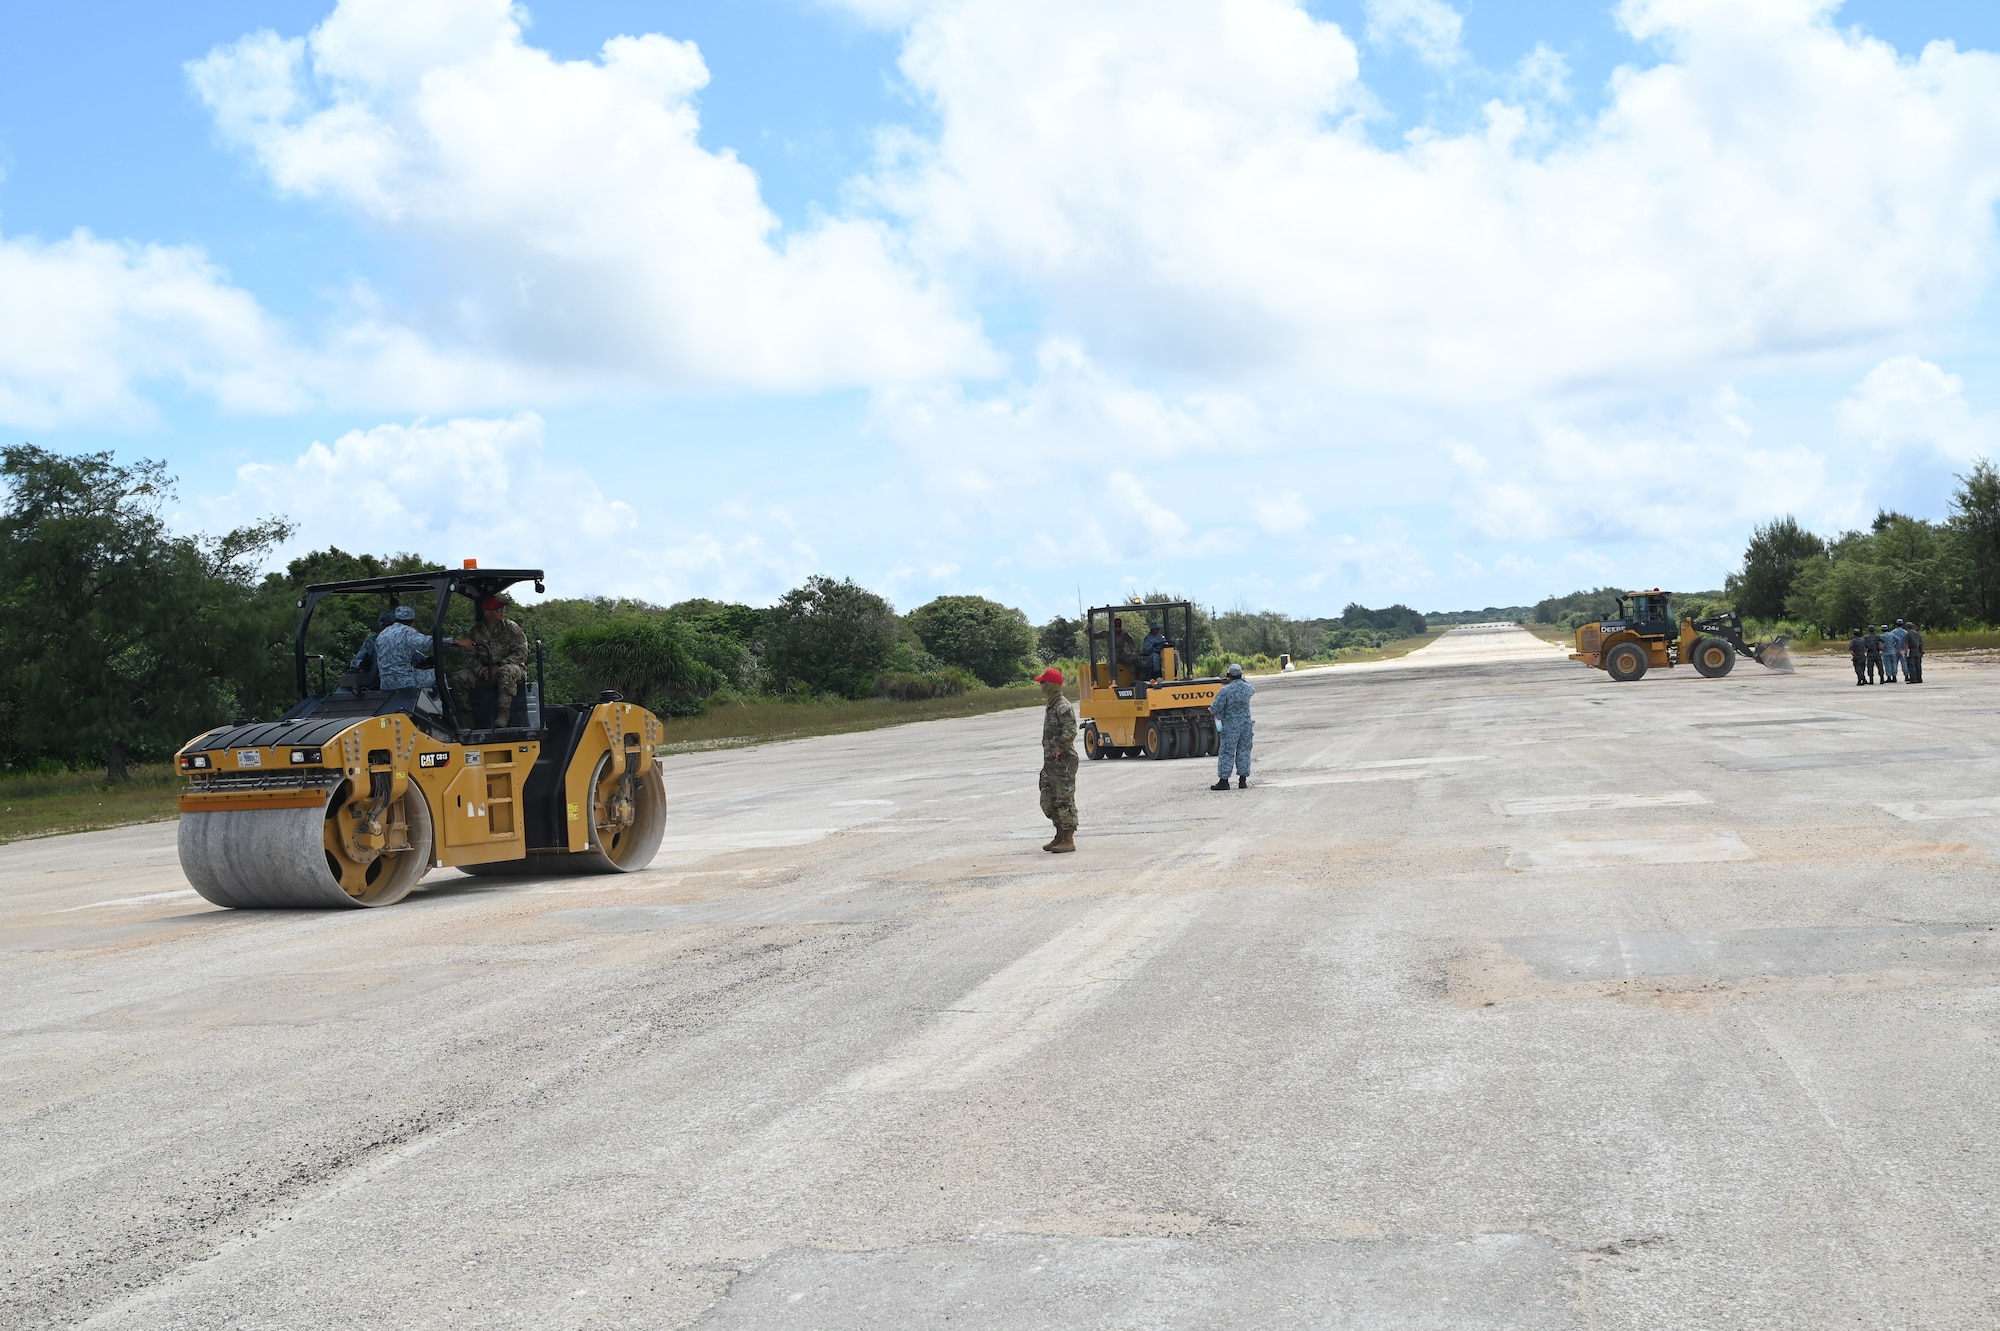 U.S. Air Force and Republic of Singapore Airmen operate heavy machinery during Silver Flag at Northwest Field, Guam, June 30, 2022.